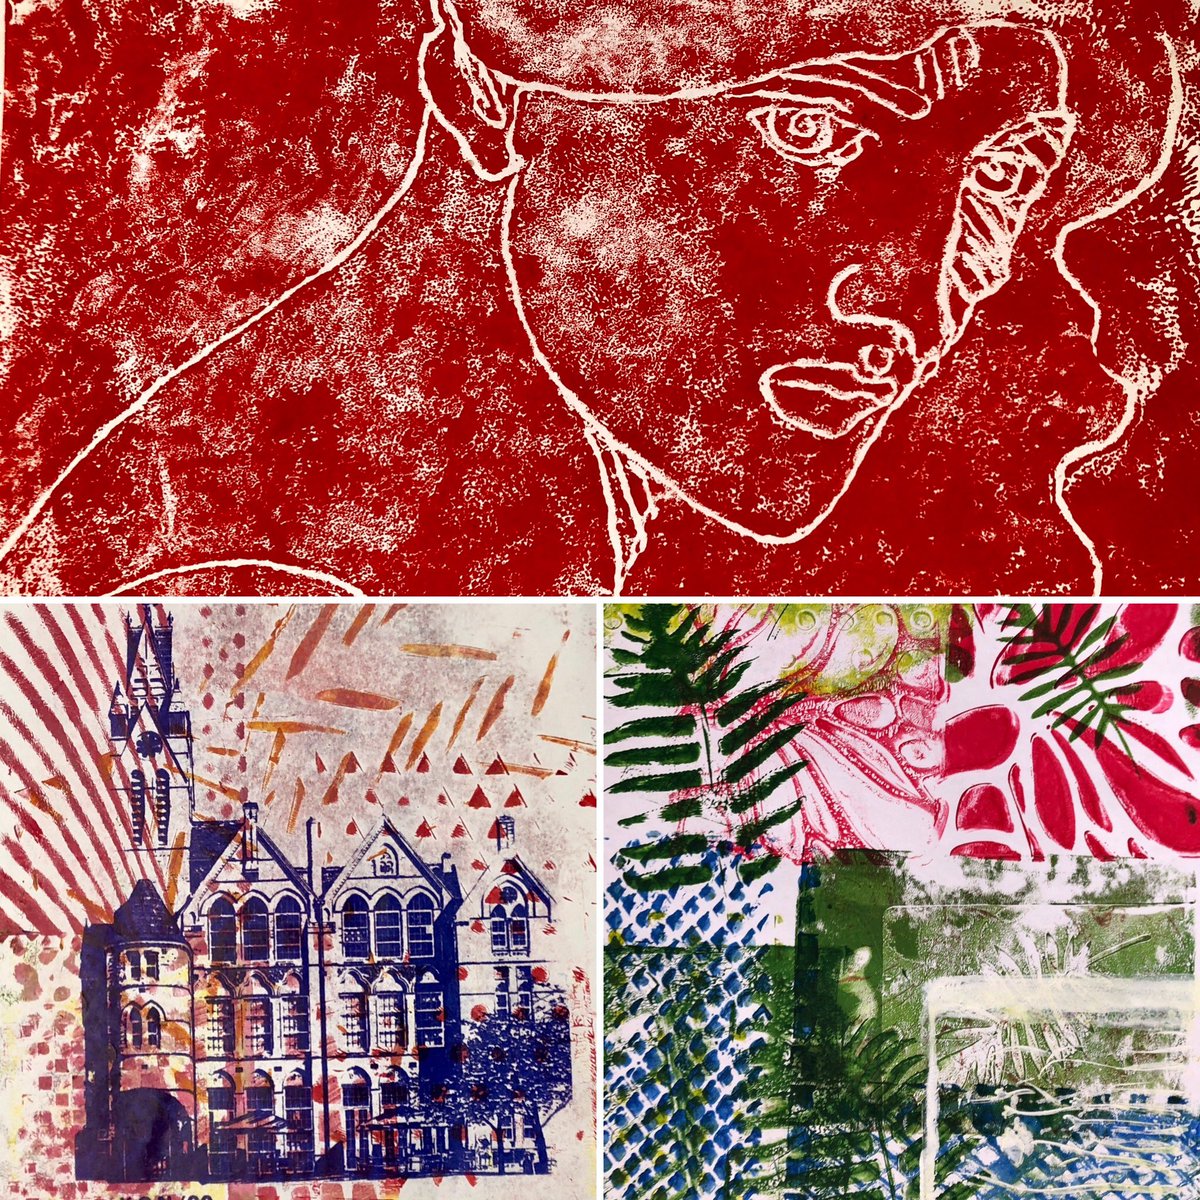 Printmaking workshop today @ikongallery with Kings Norton Girls school, experimenting with screen printing, mono printing & Gelli prints and layering these different processes, well done everyone. And a pleasure as always working with Will